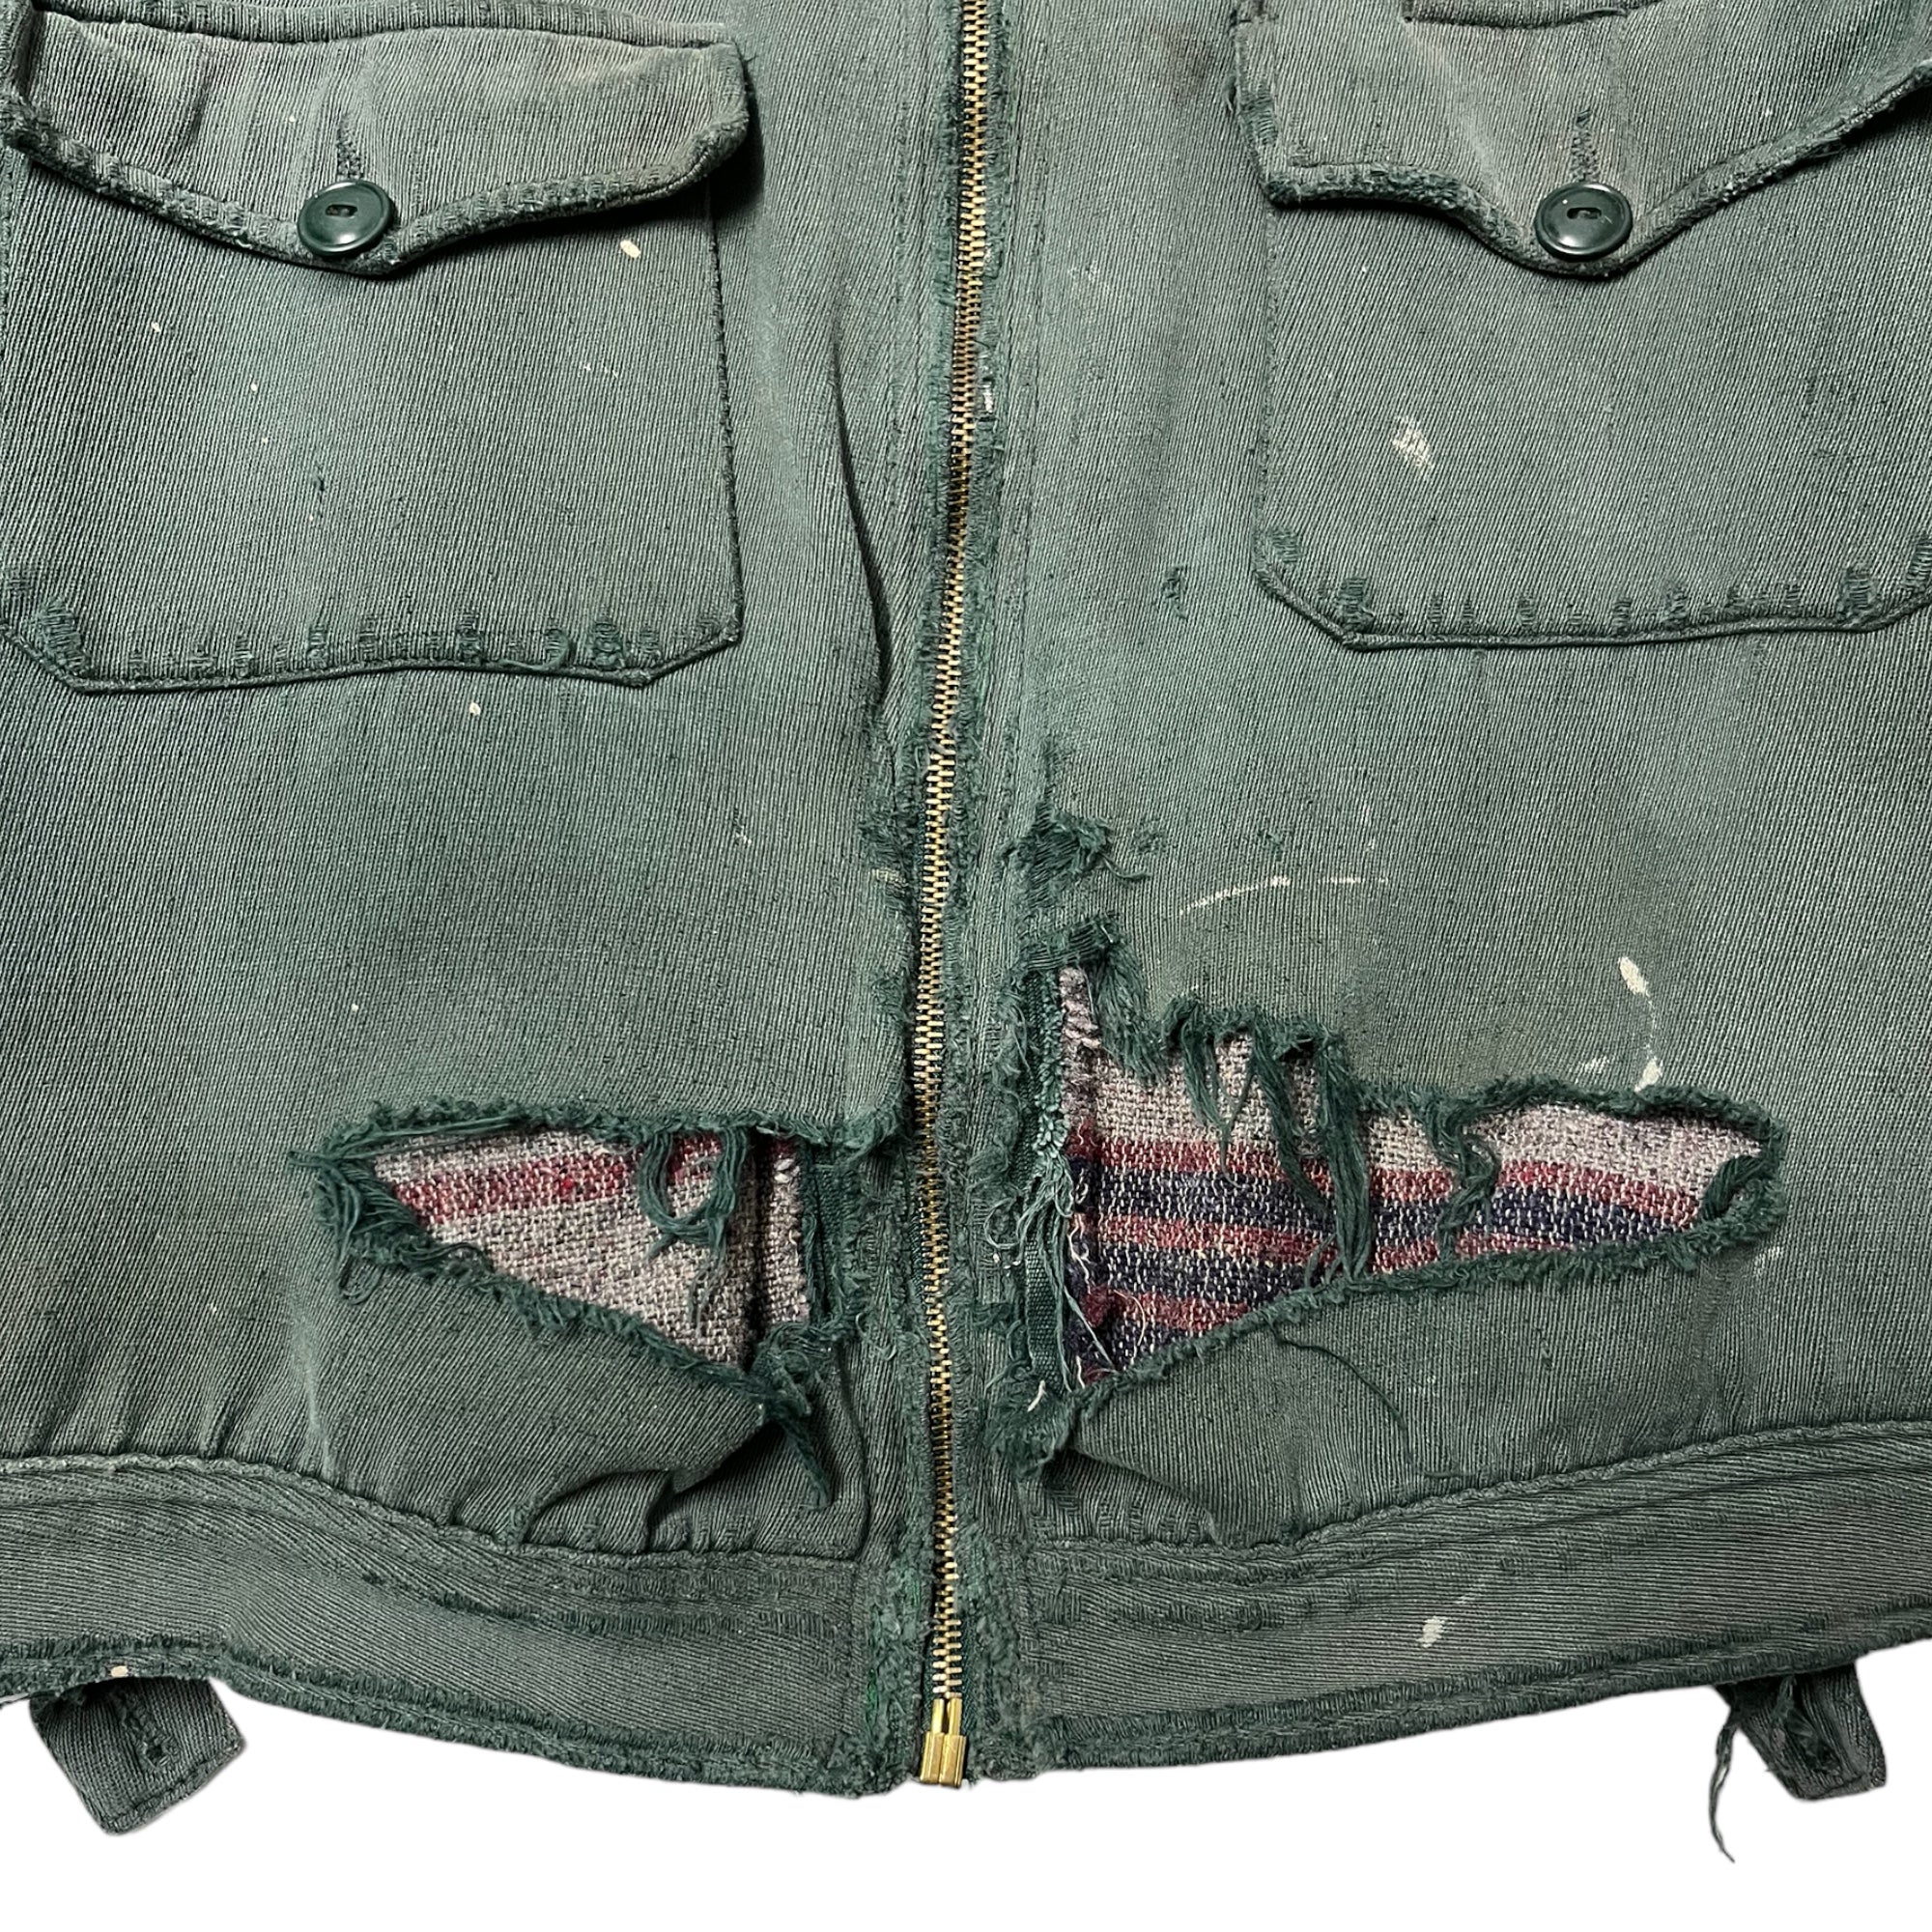 1950s Thrashed Whipcord Zip-Up Jacket - Sun Faded Green - S/M